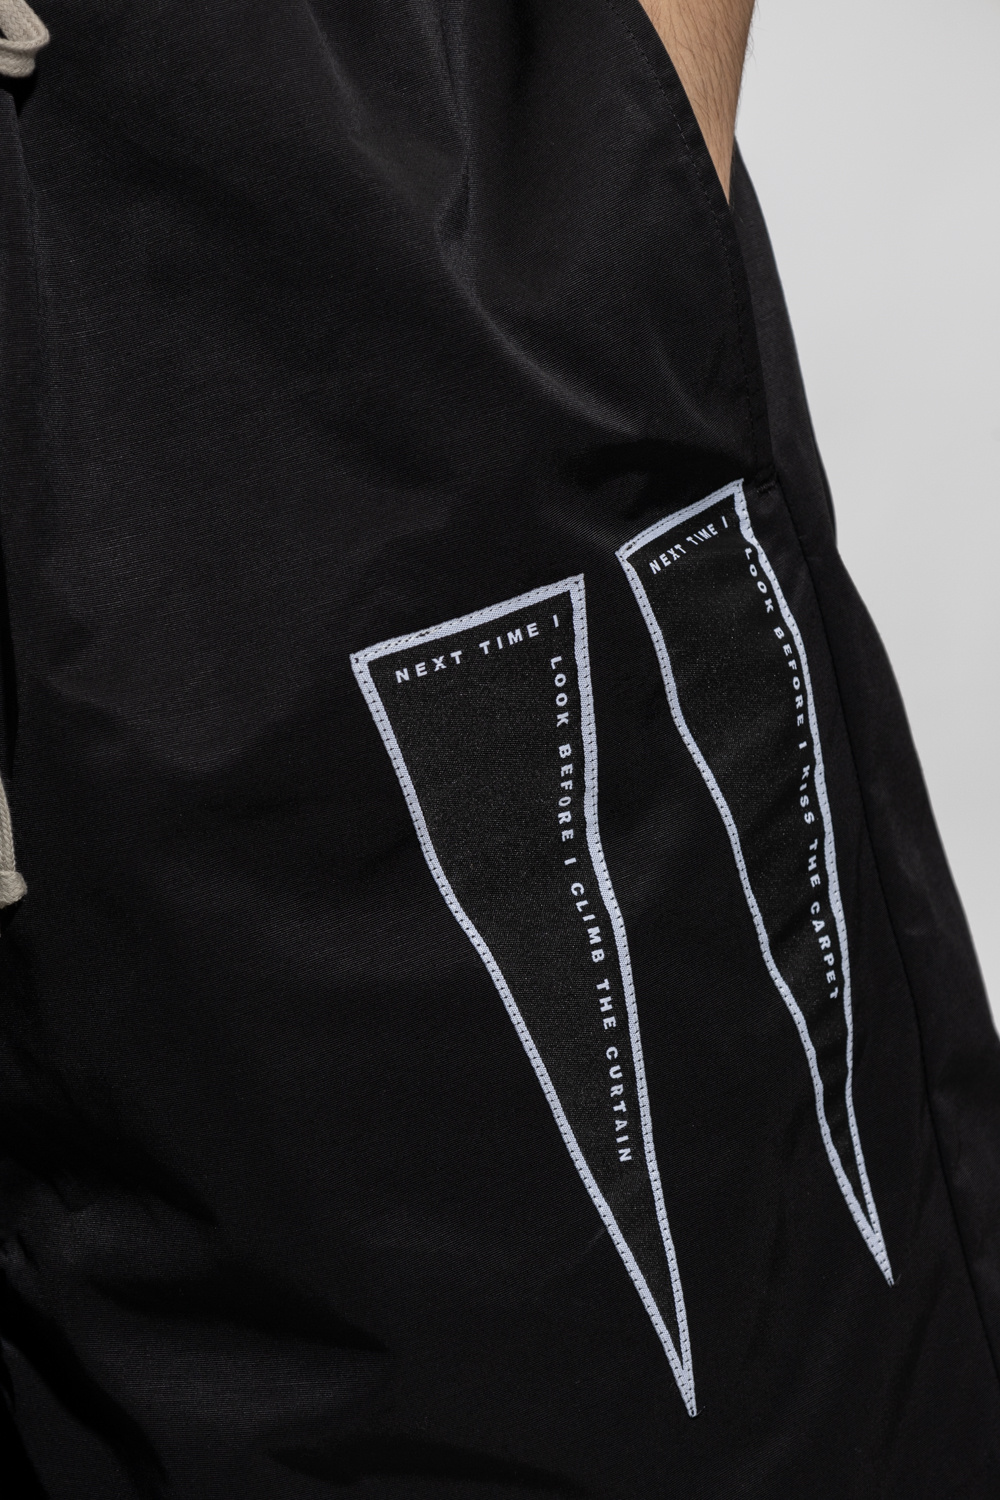 Rick Owens DRKSHDW Patched Shell shorts